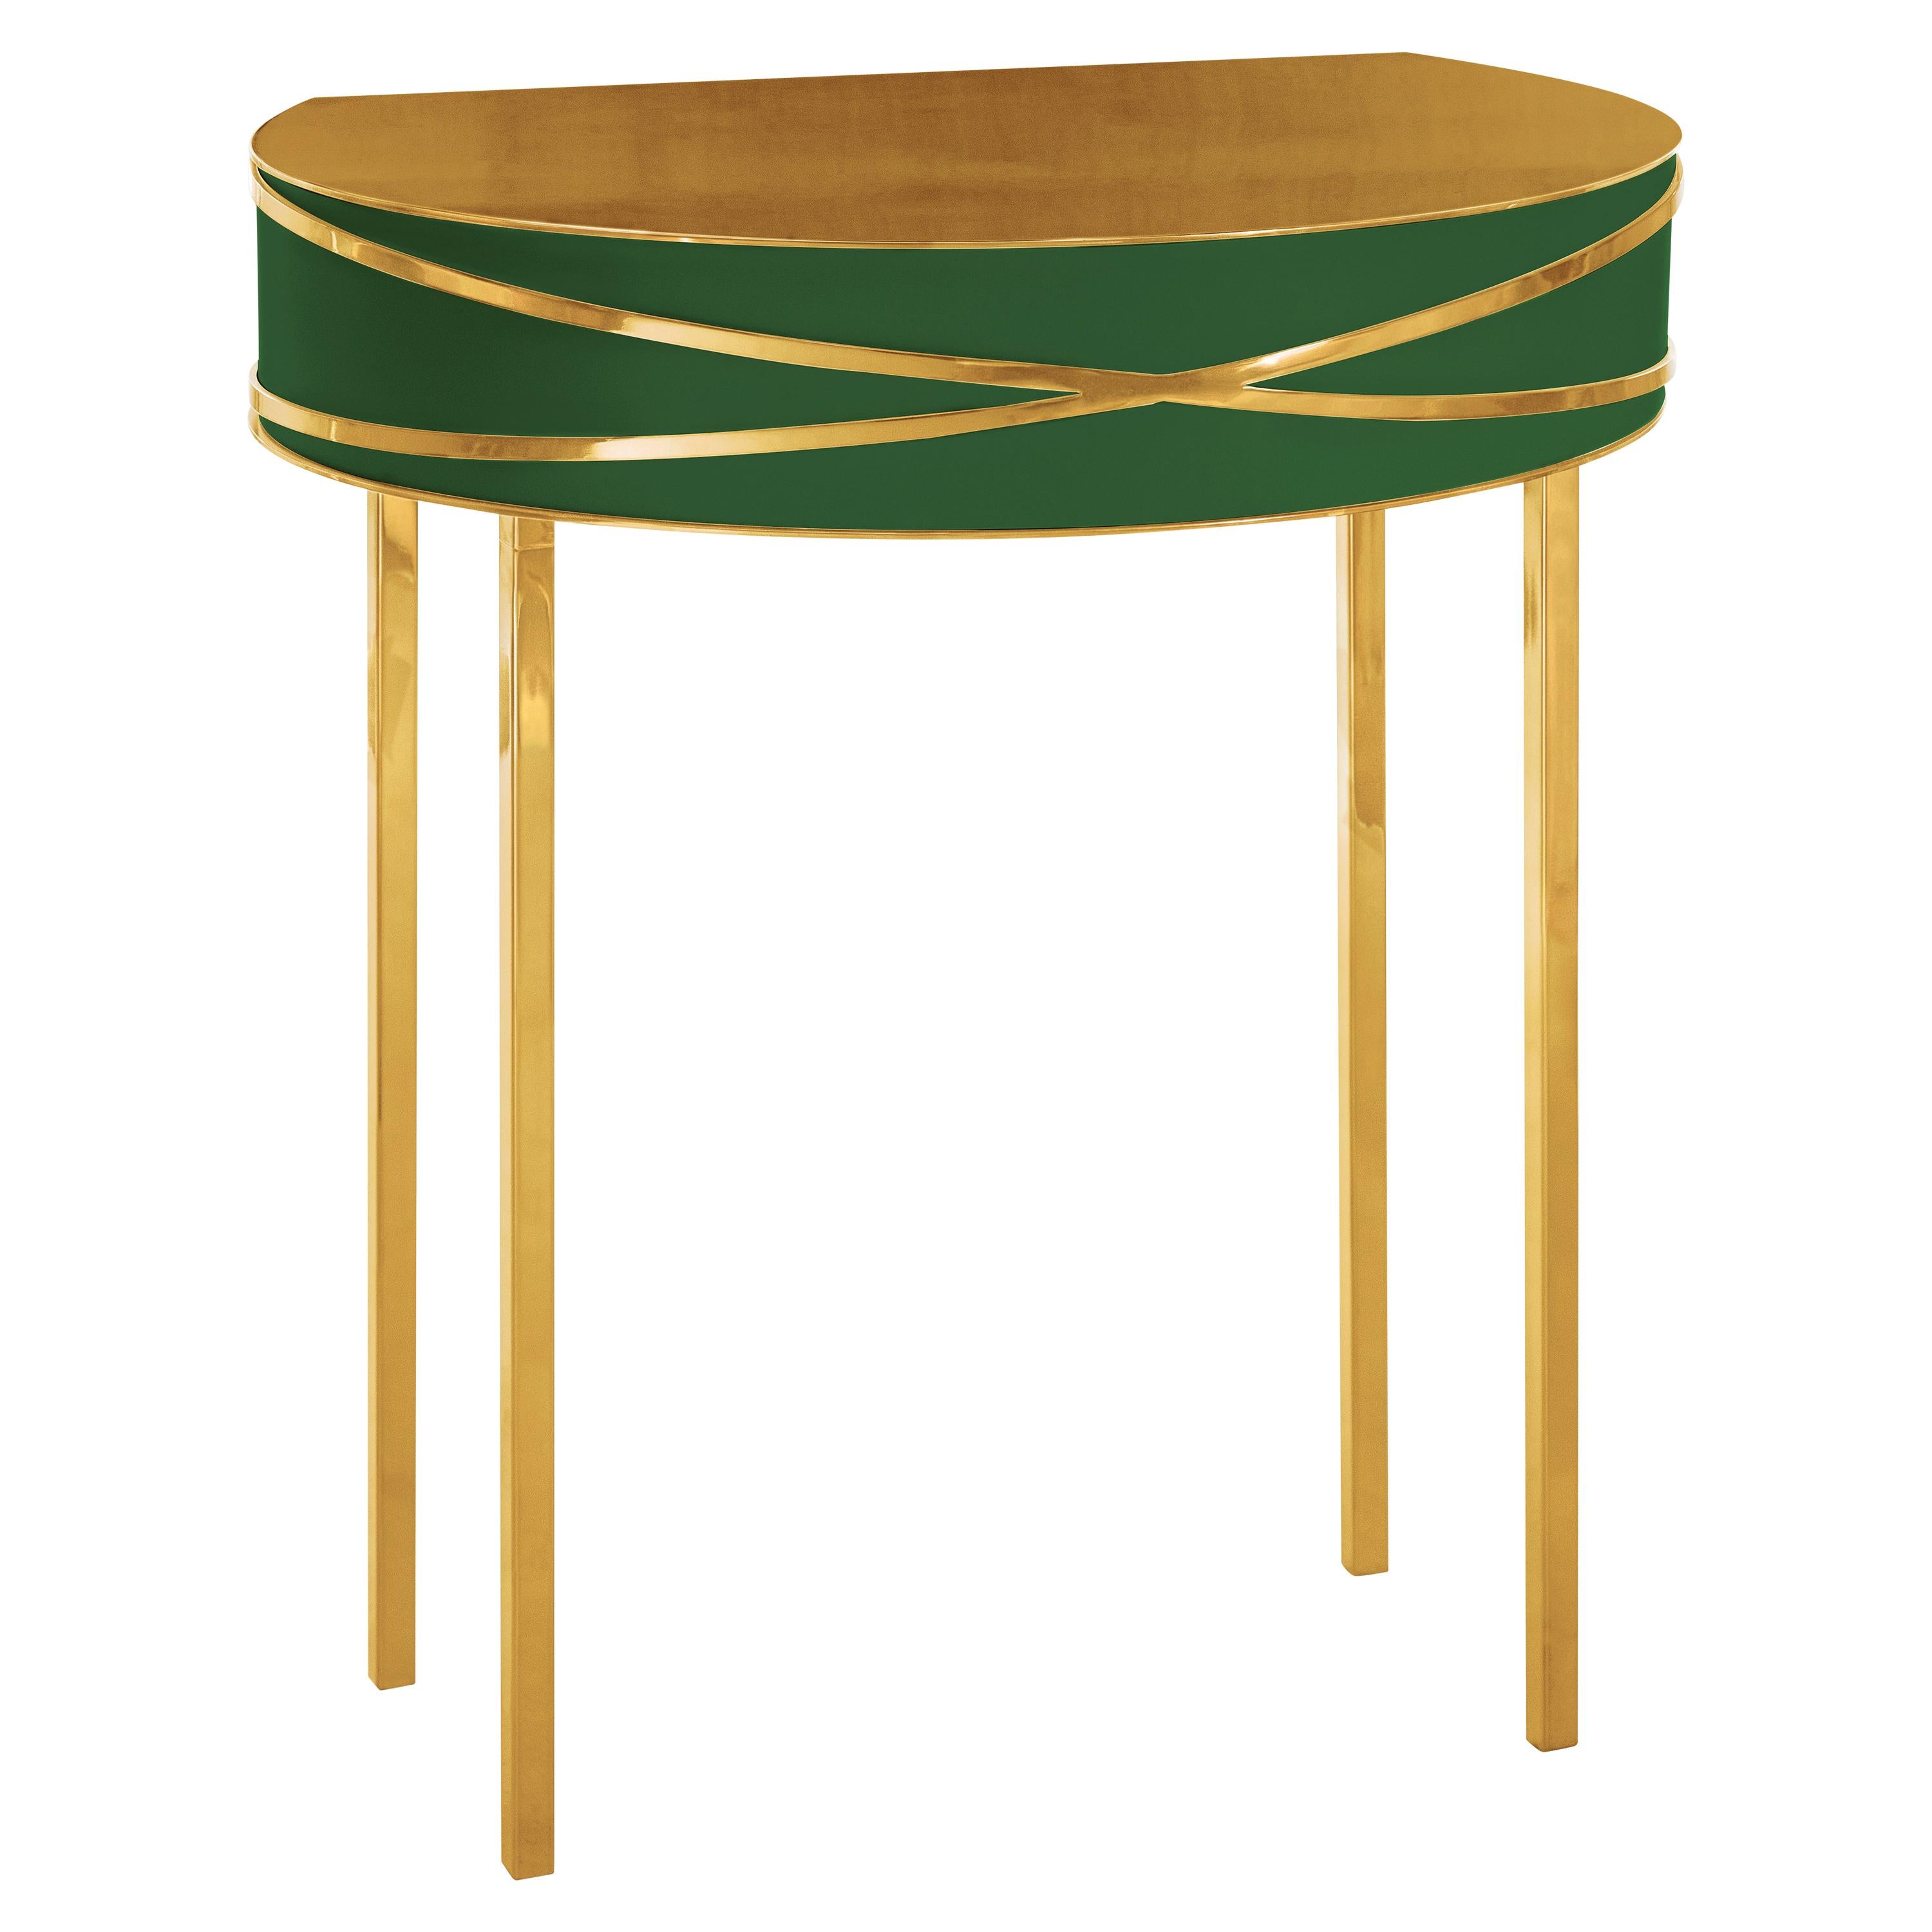 Stella Green Console or Bedside Table with Gold Trims by Nika Zupanc For Sale